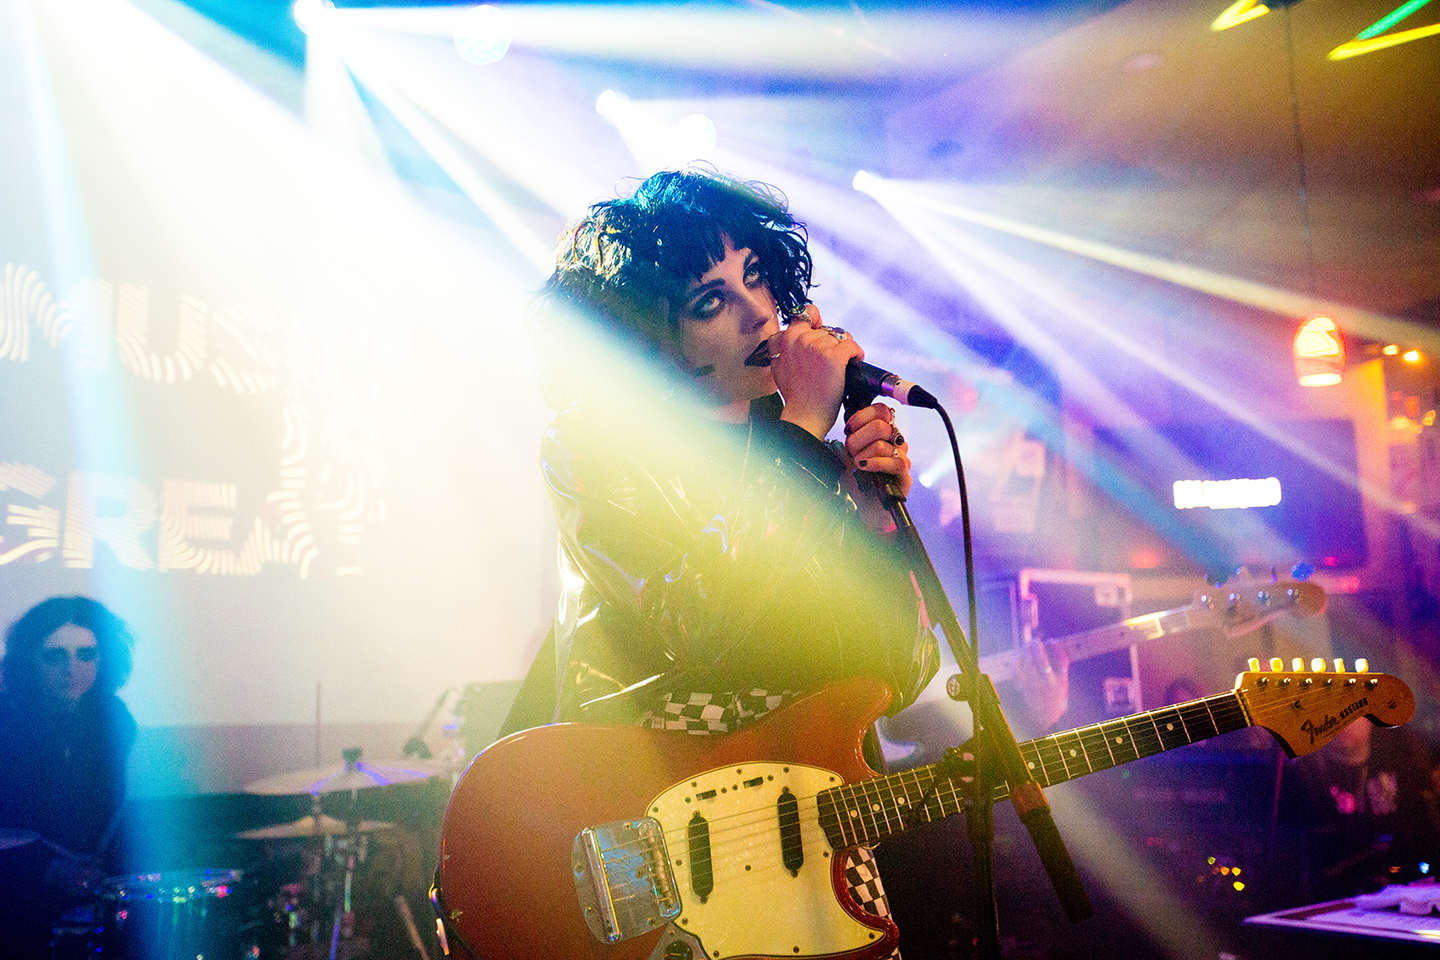 Pale Waves was part of the BBC Music Introducing presents in association with PRS Foundation showcase at the British Music Embassy @ Latitude 30.